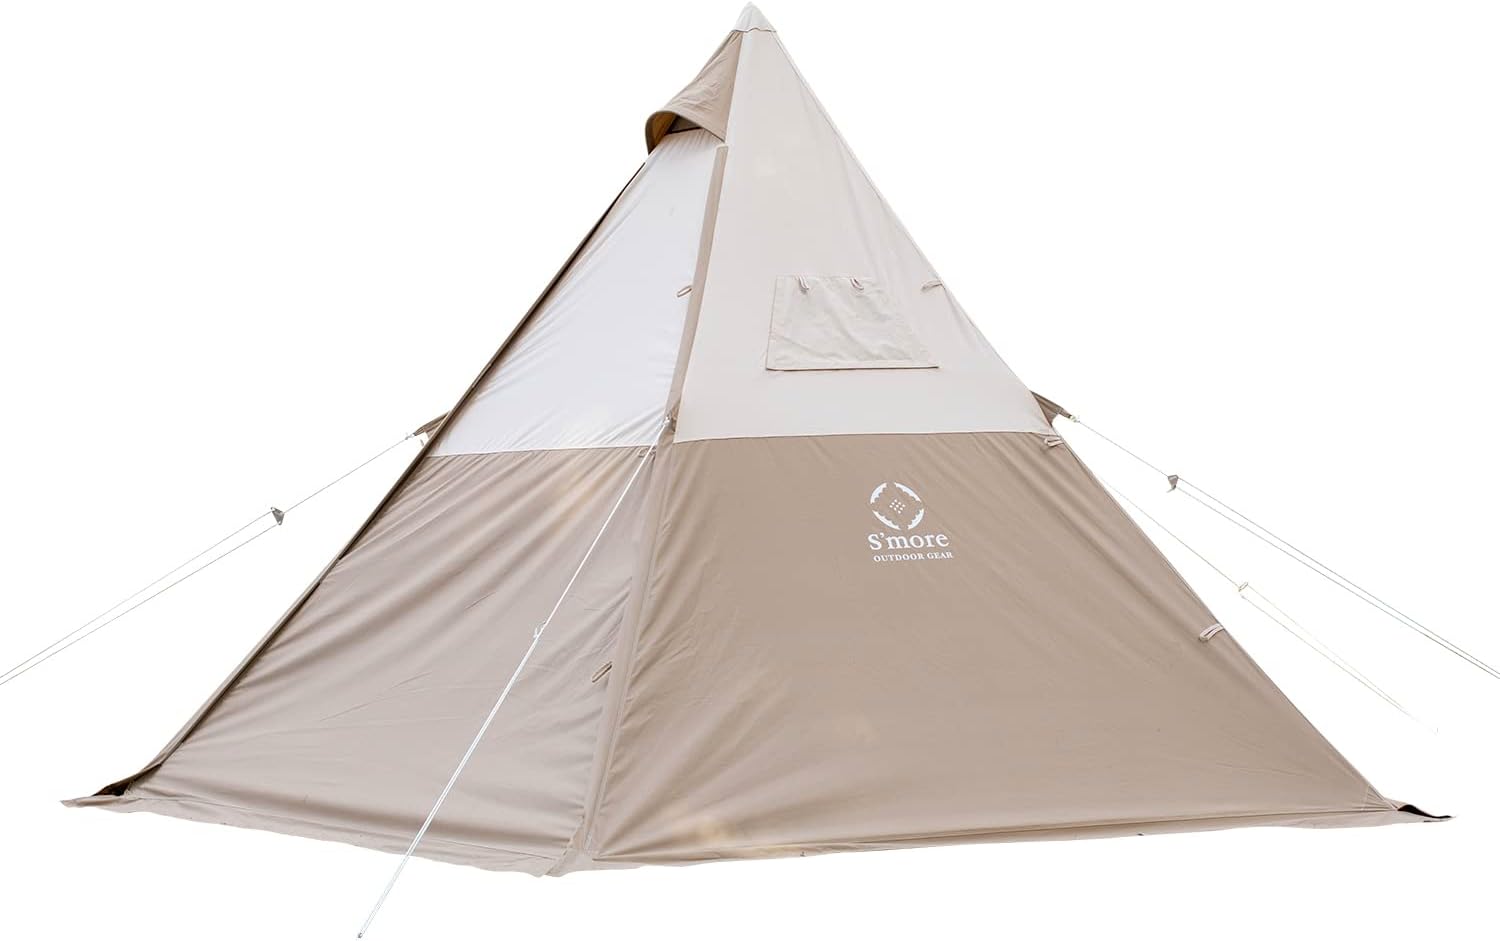 Smore Pyramid Tent For 4 Person